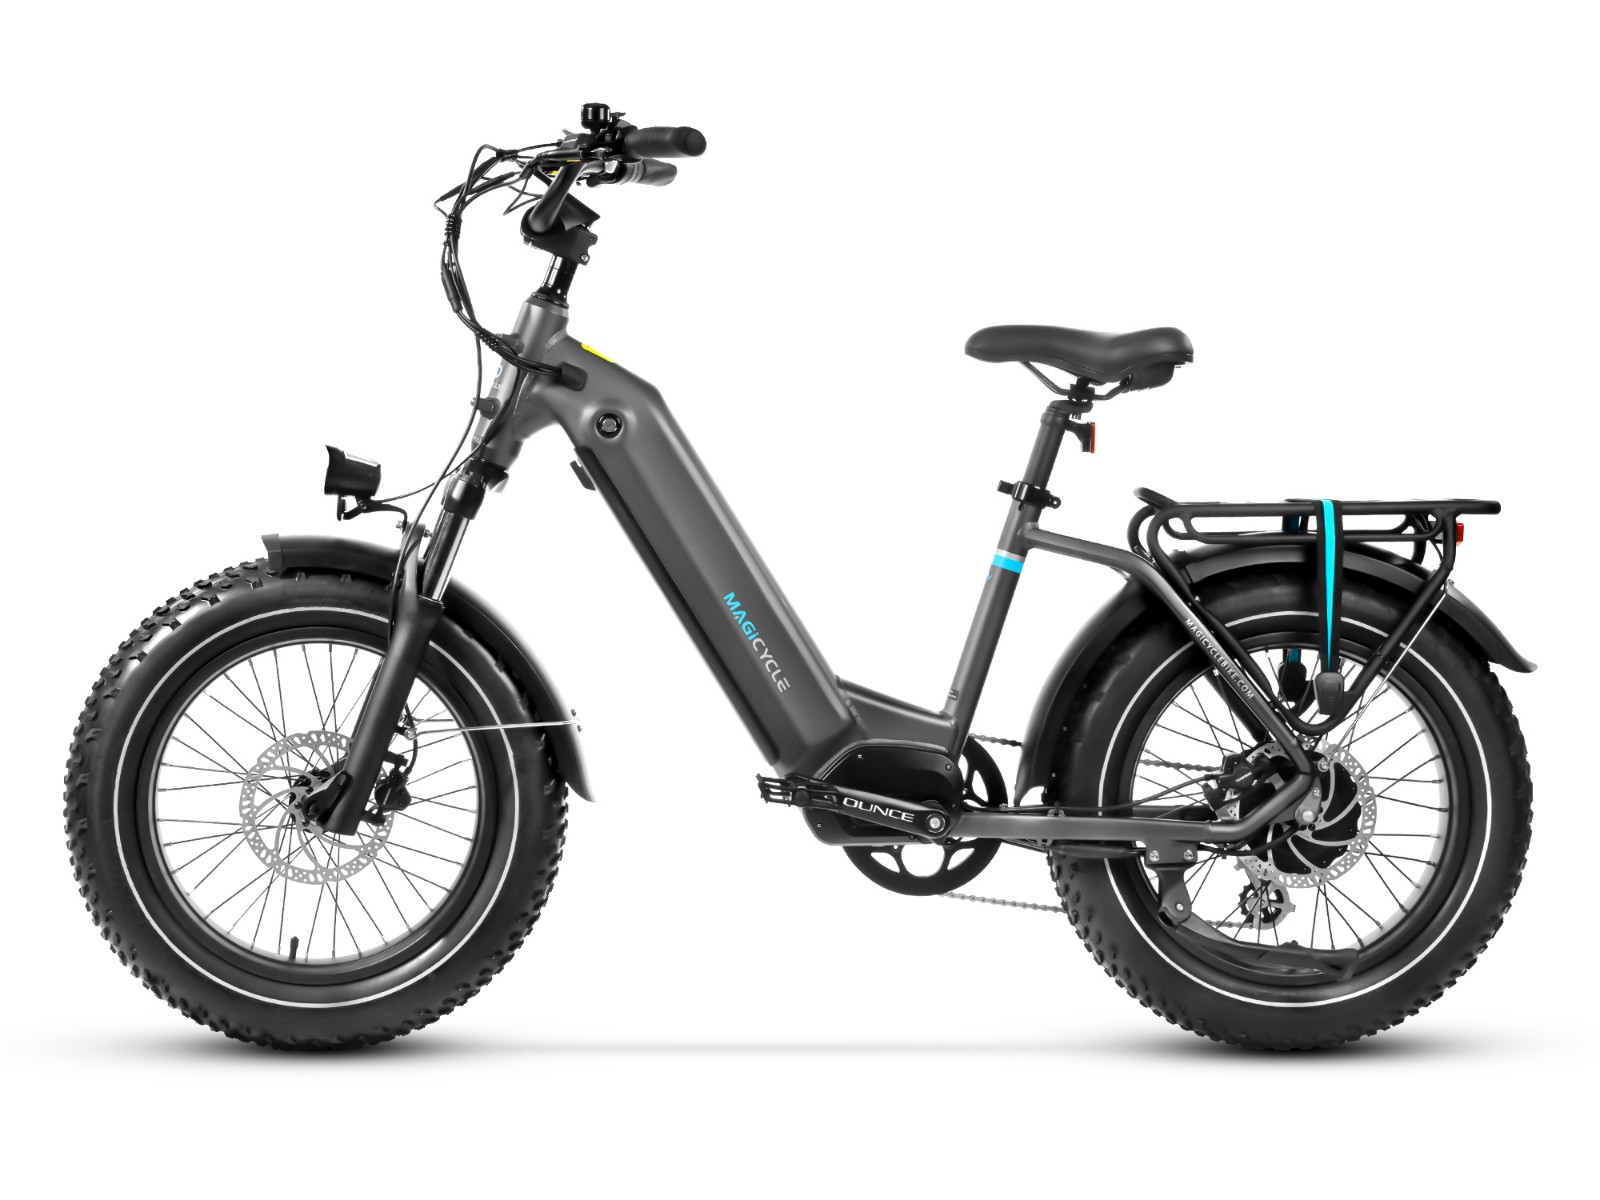 Magicycle Ocelot Pro Long Range Step-Thru Fat Tire Electric Bike - Canada Only